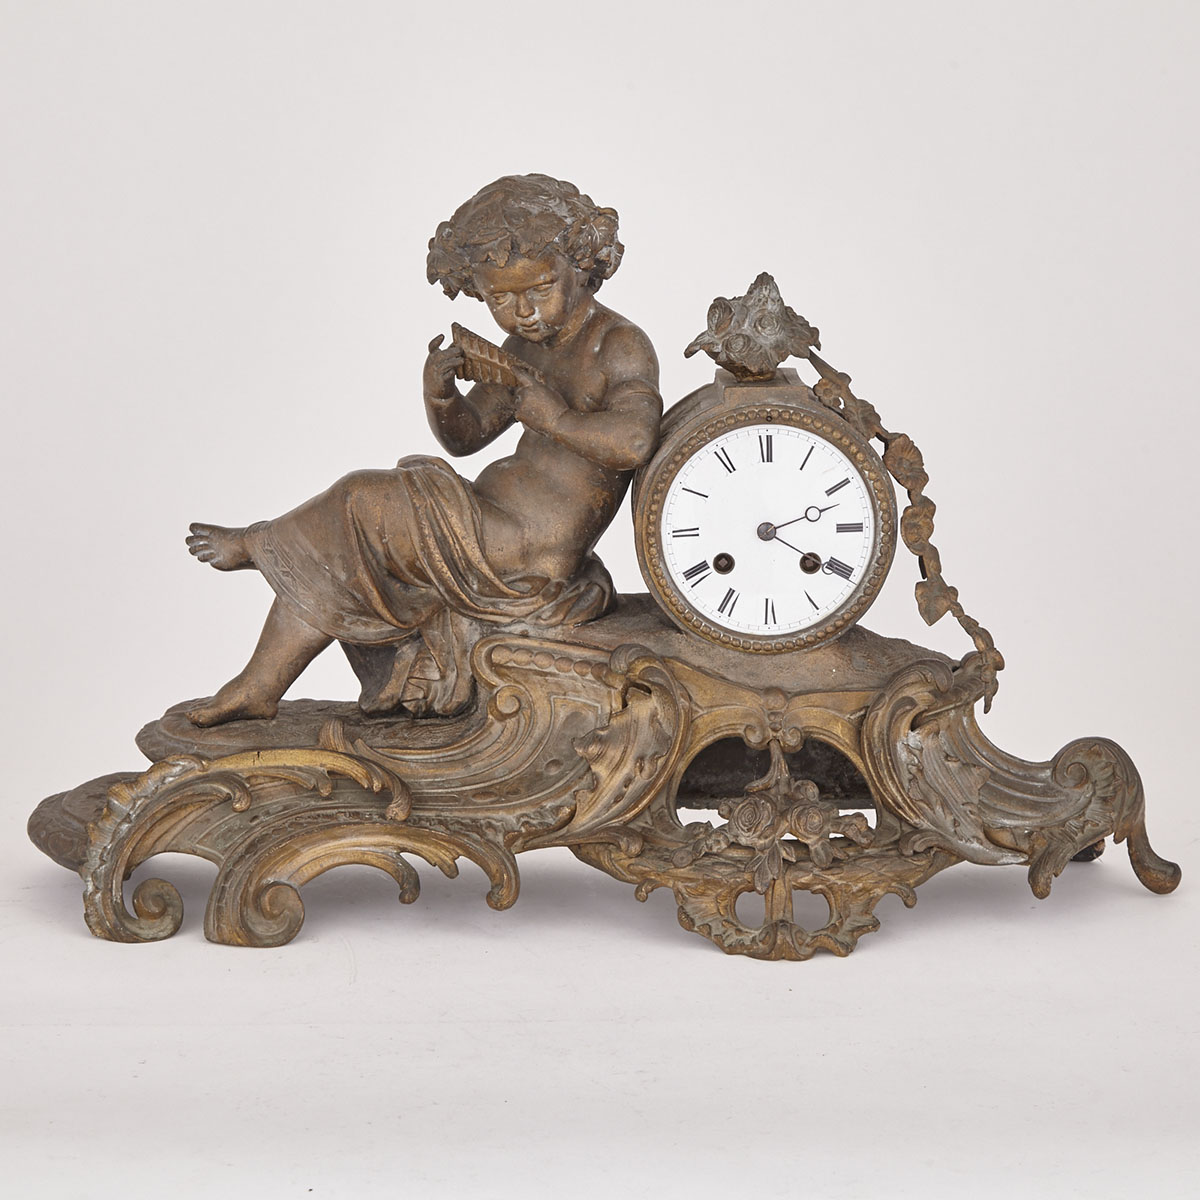 French Gilt Metal Mantel Clock with Figure of Pan, 19th century